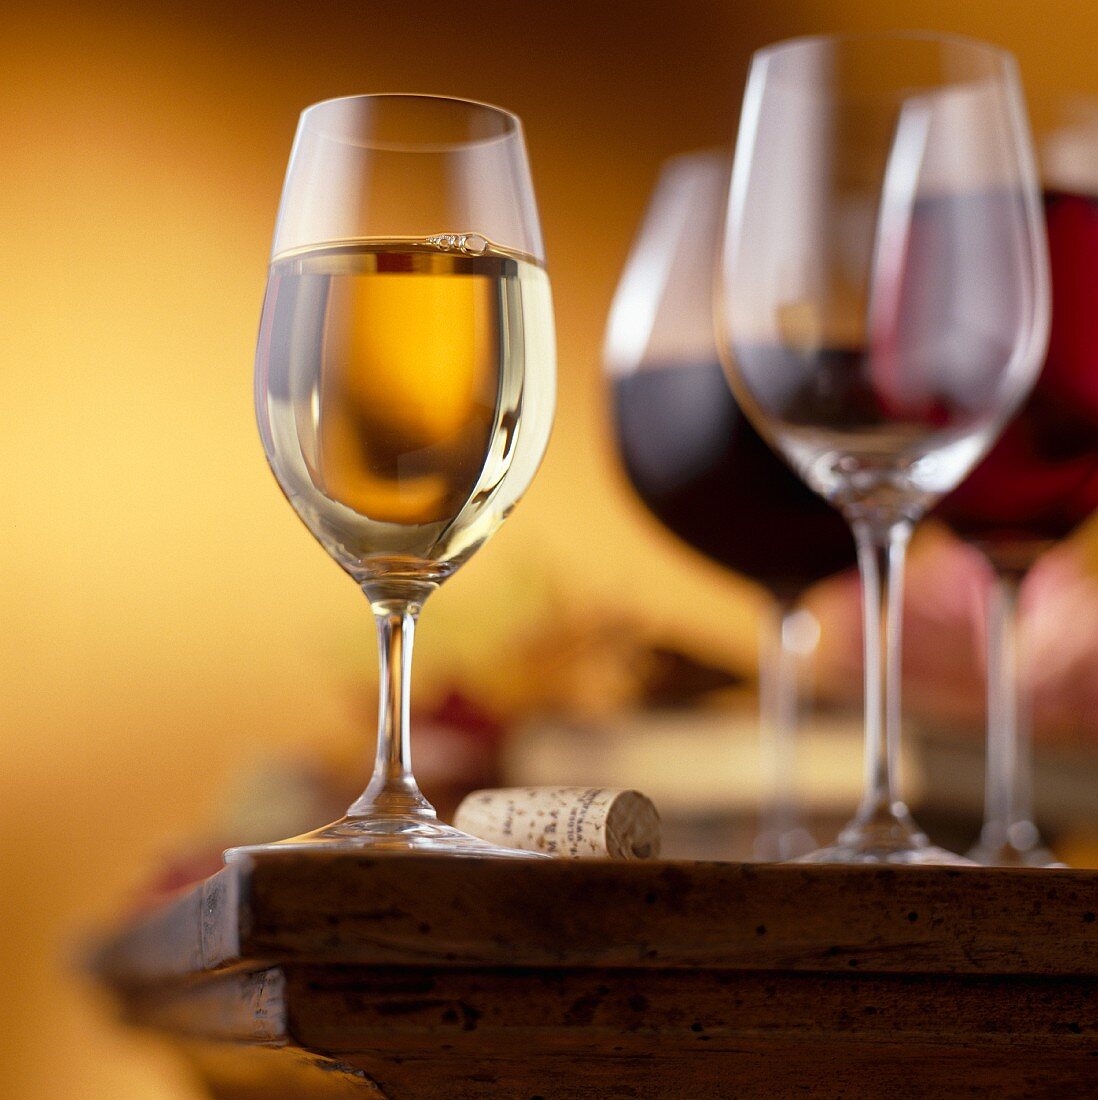 Glass of White Wine on a Table with Wine Cork, Wine Glasses and Glass of Red Wine